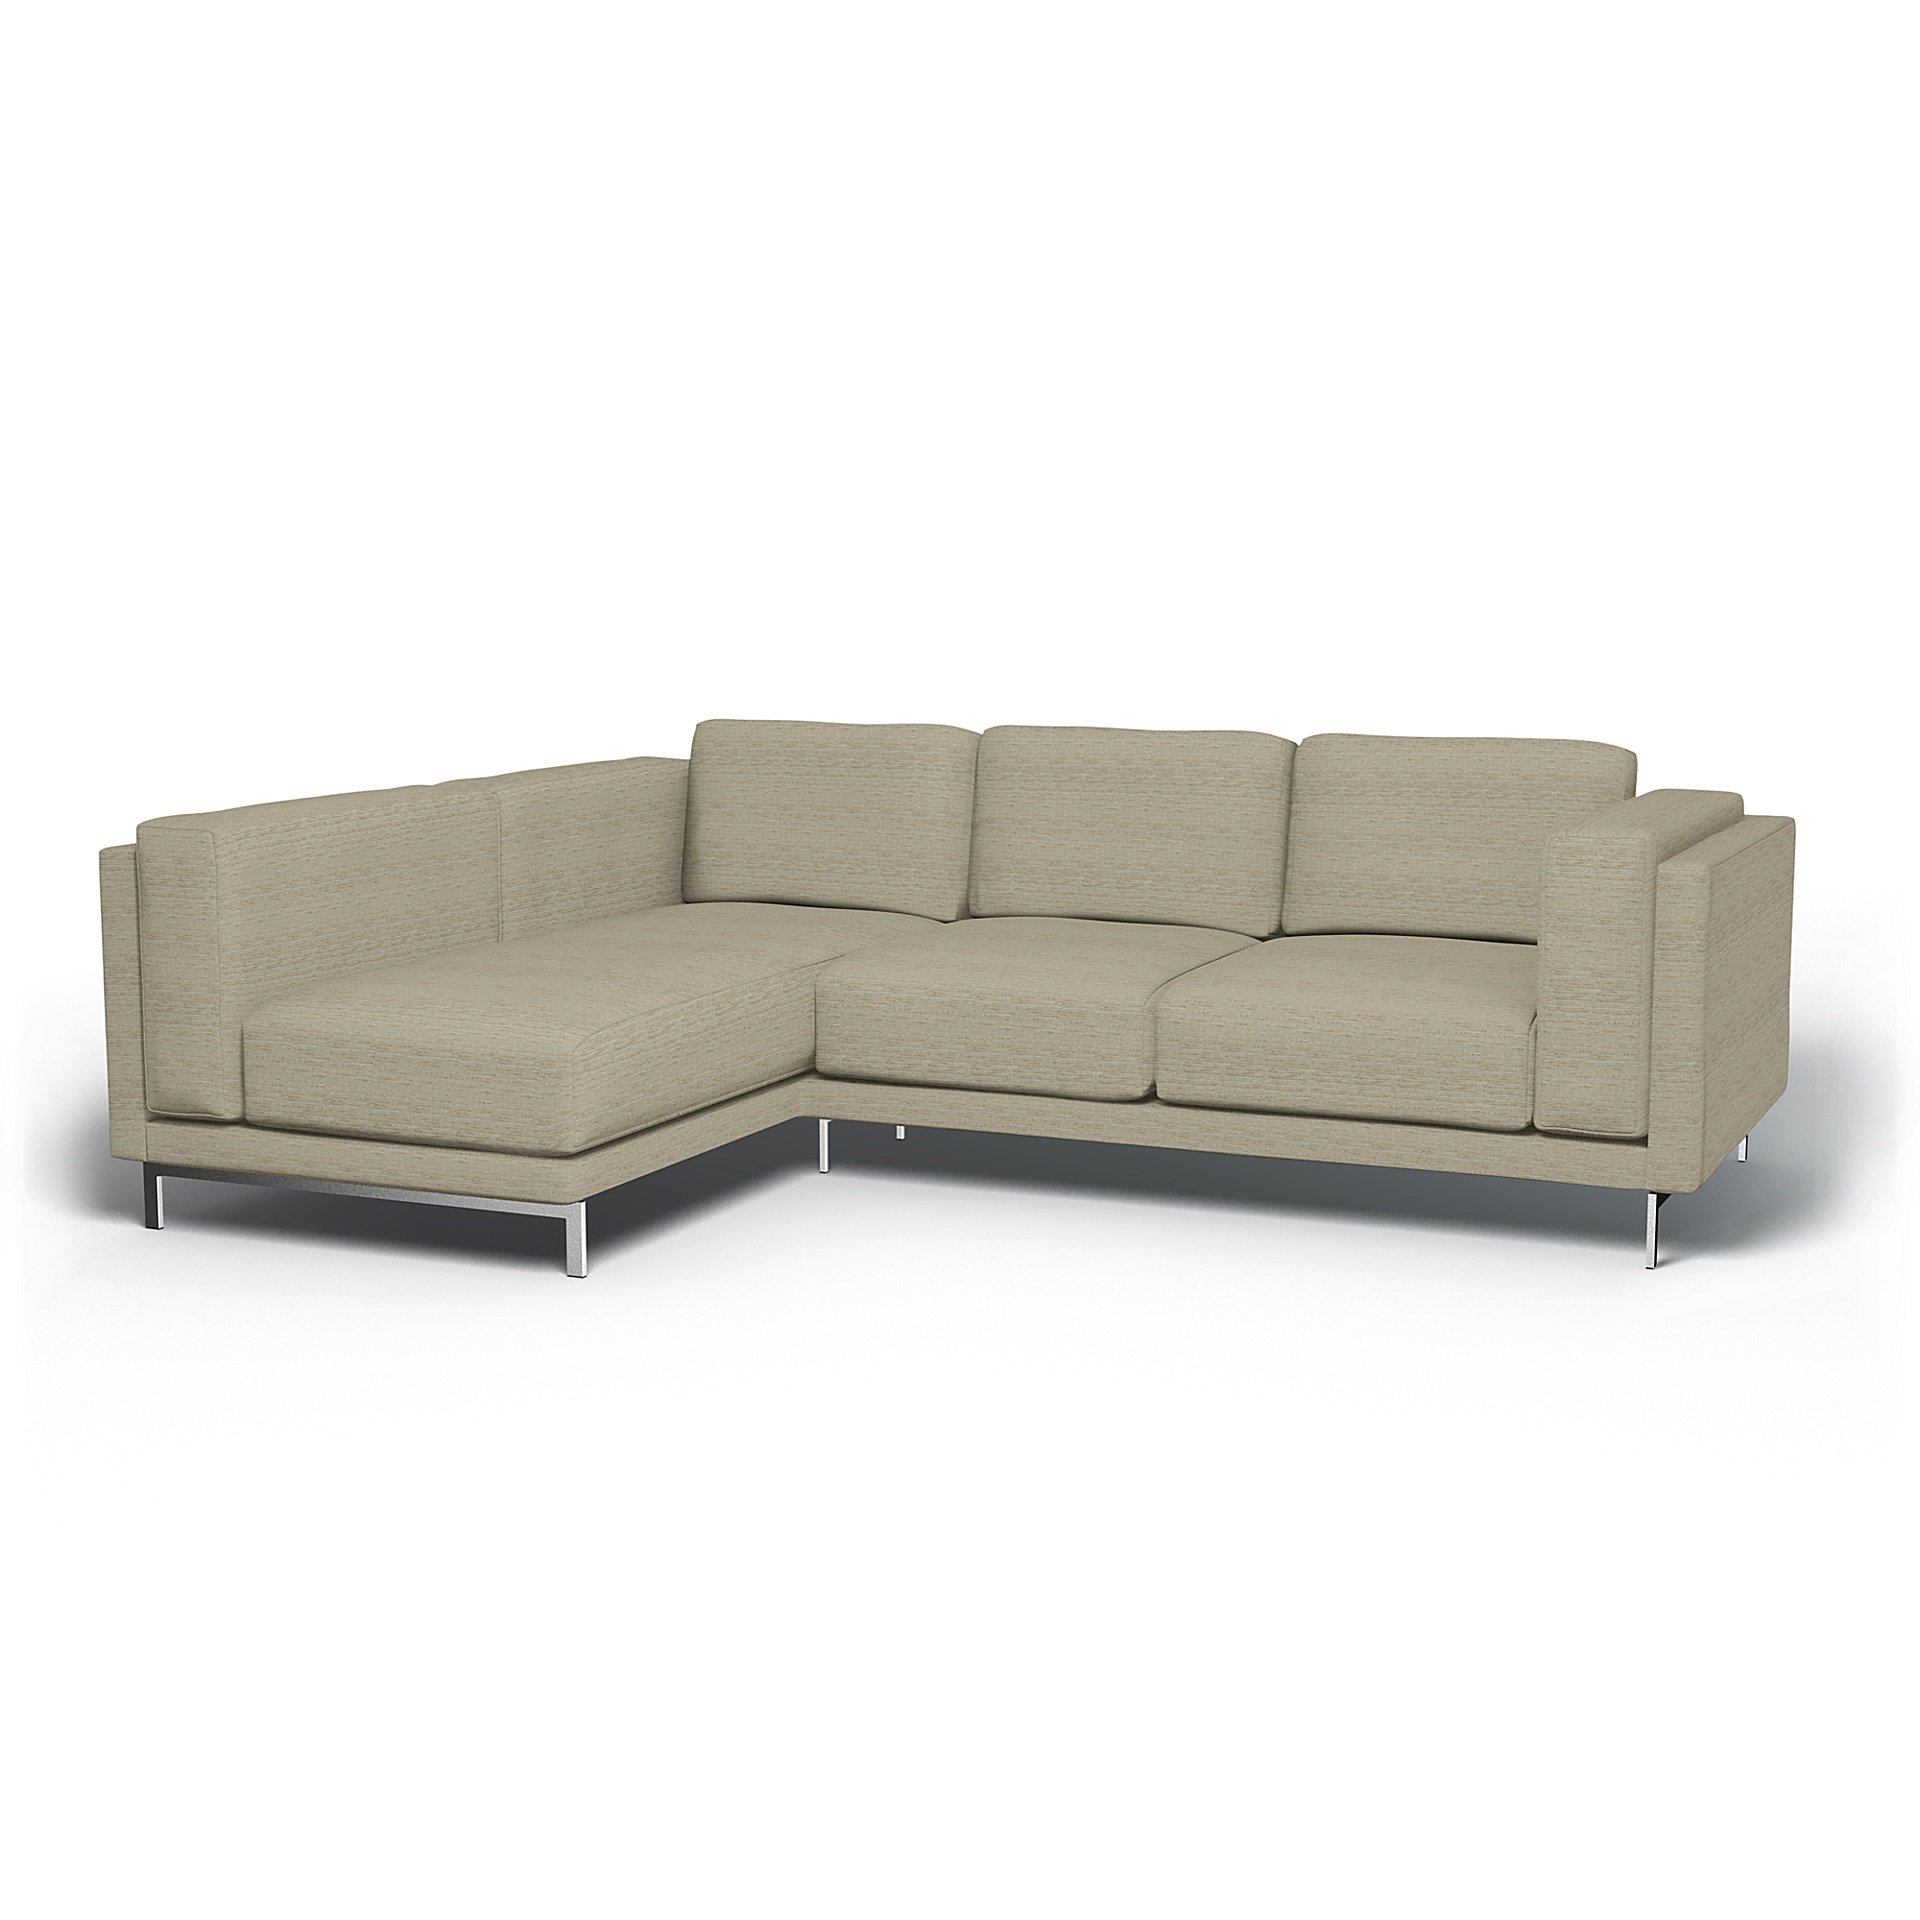 IKEA - Nockeby 3 Seater Sofa with Left Chaise Cover, Light Sand, Boucle & Texture - Bemz